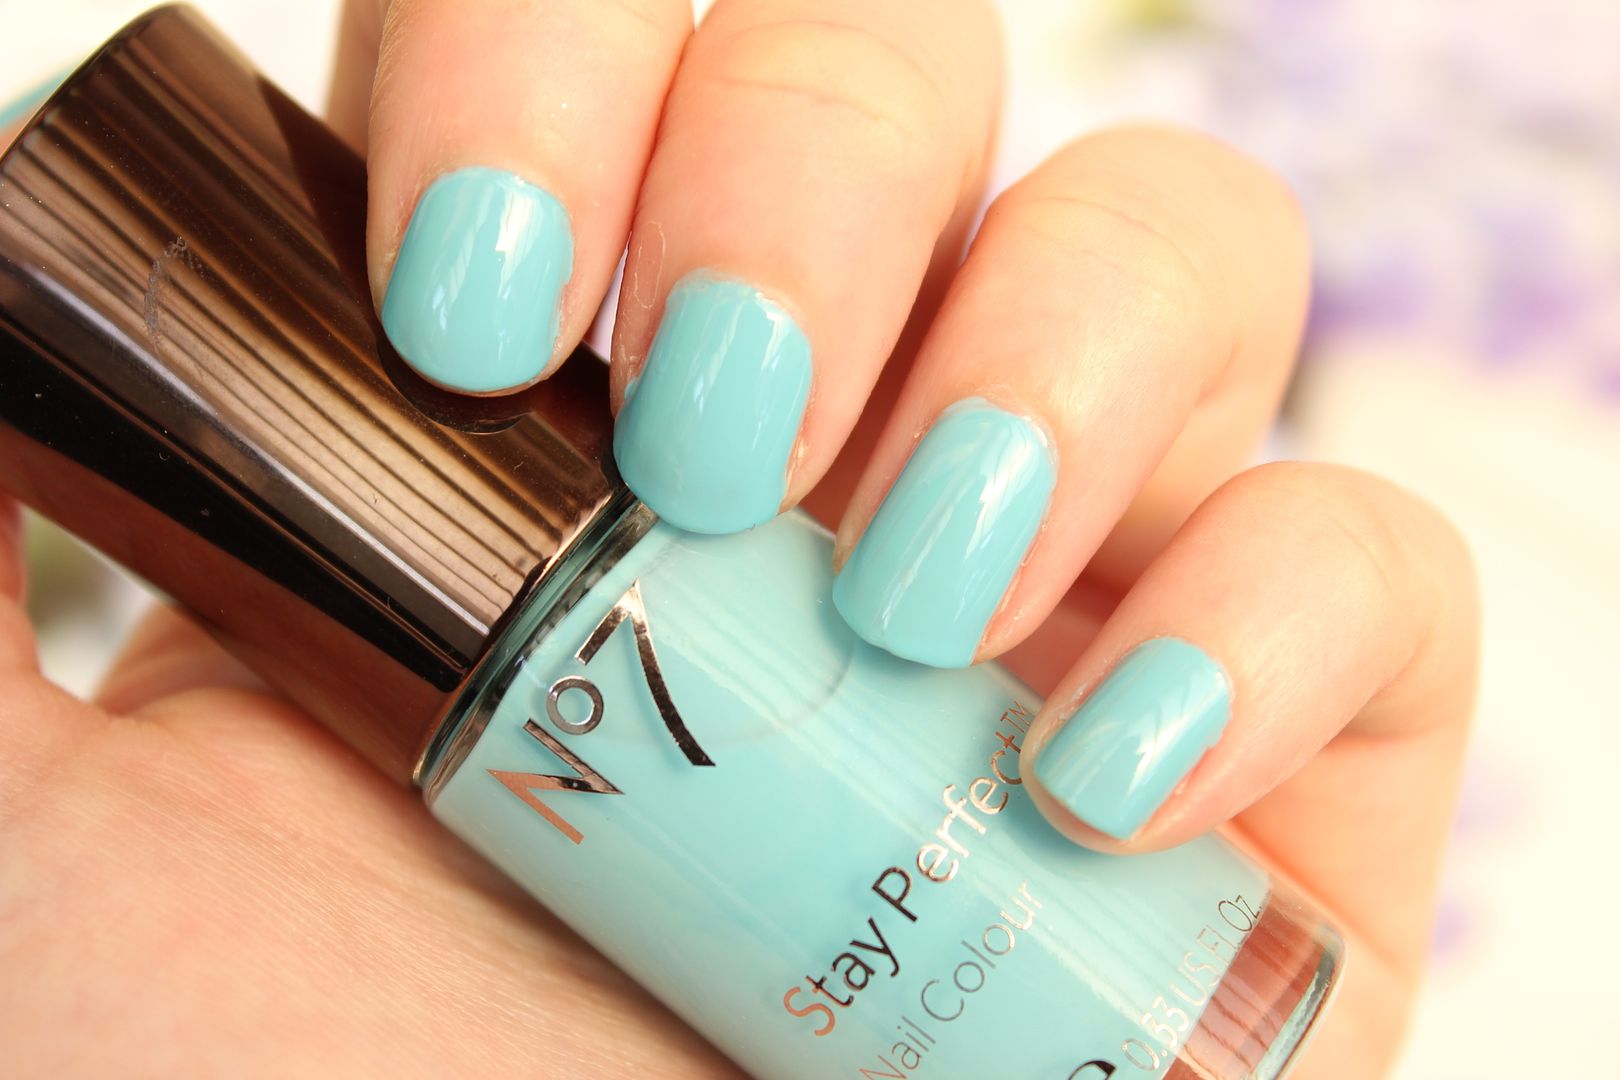 No7 Stay Perfect Nail Colour in Minty Fresh